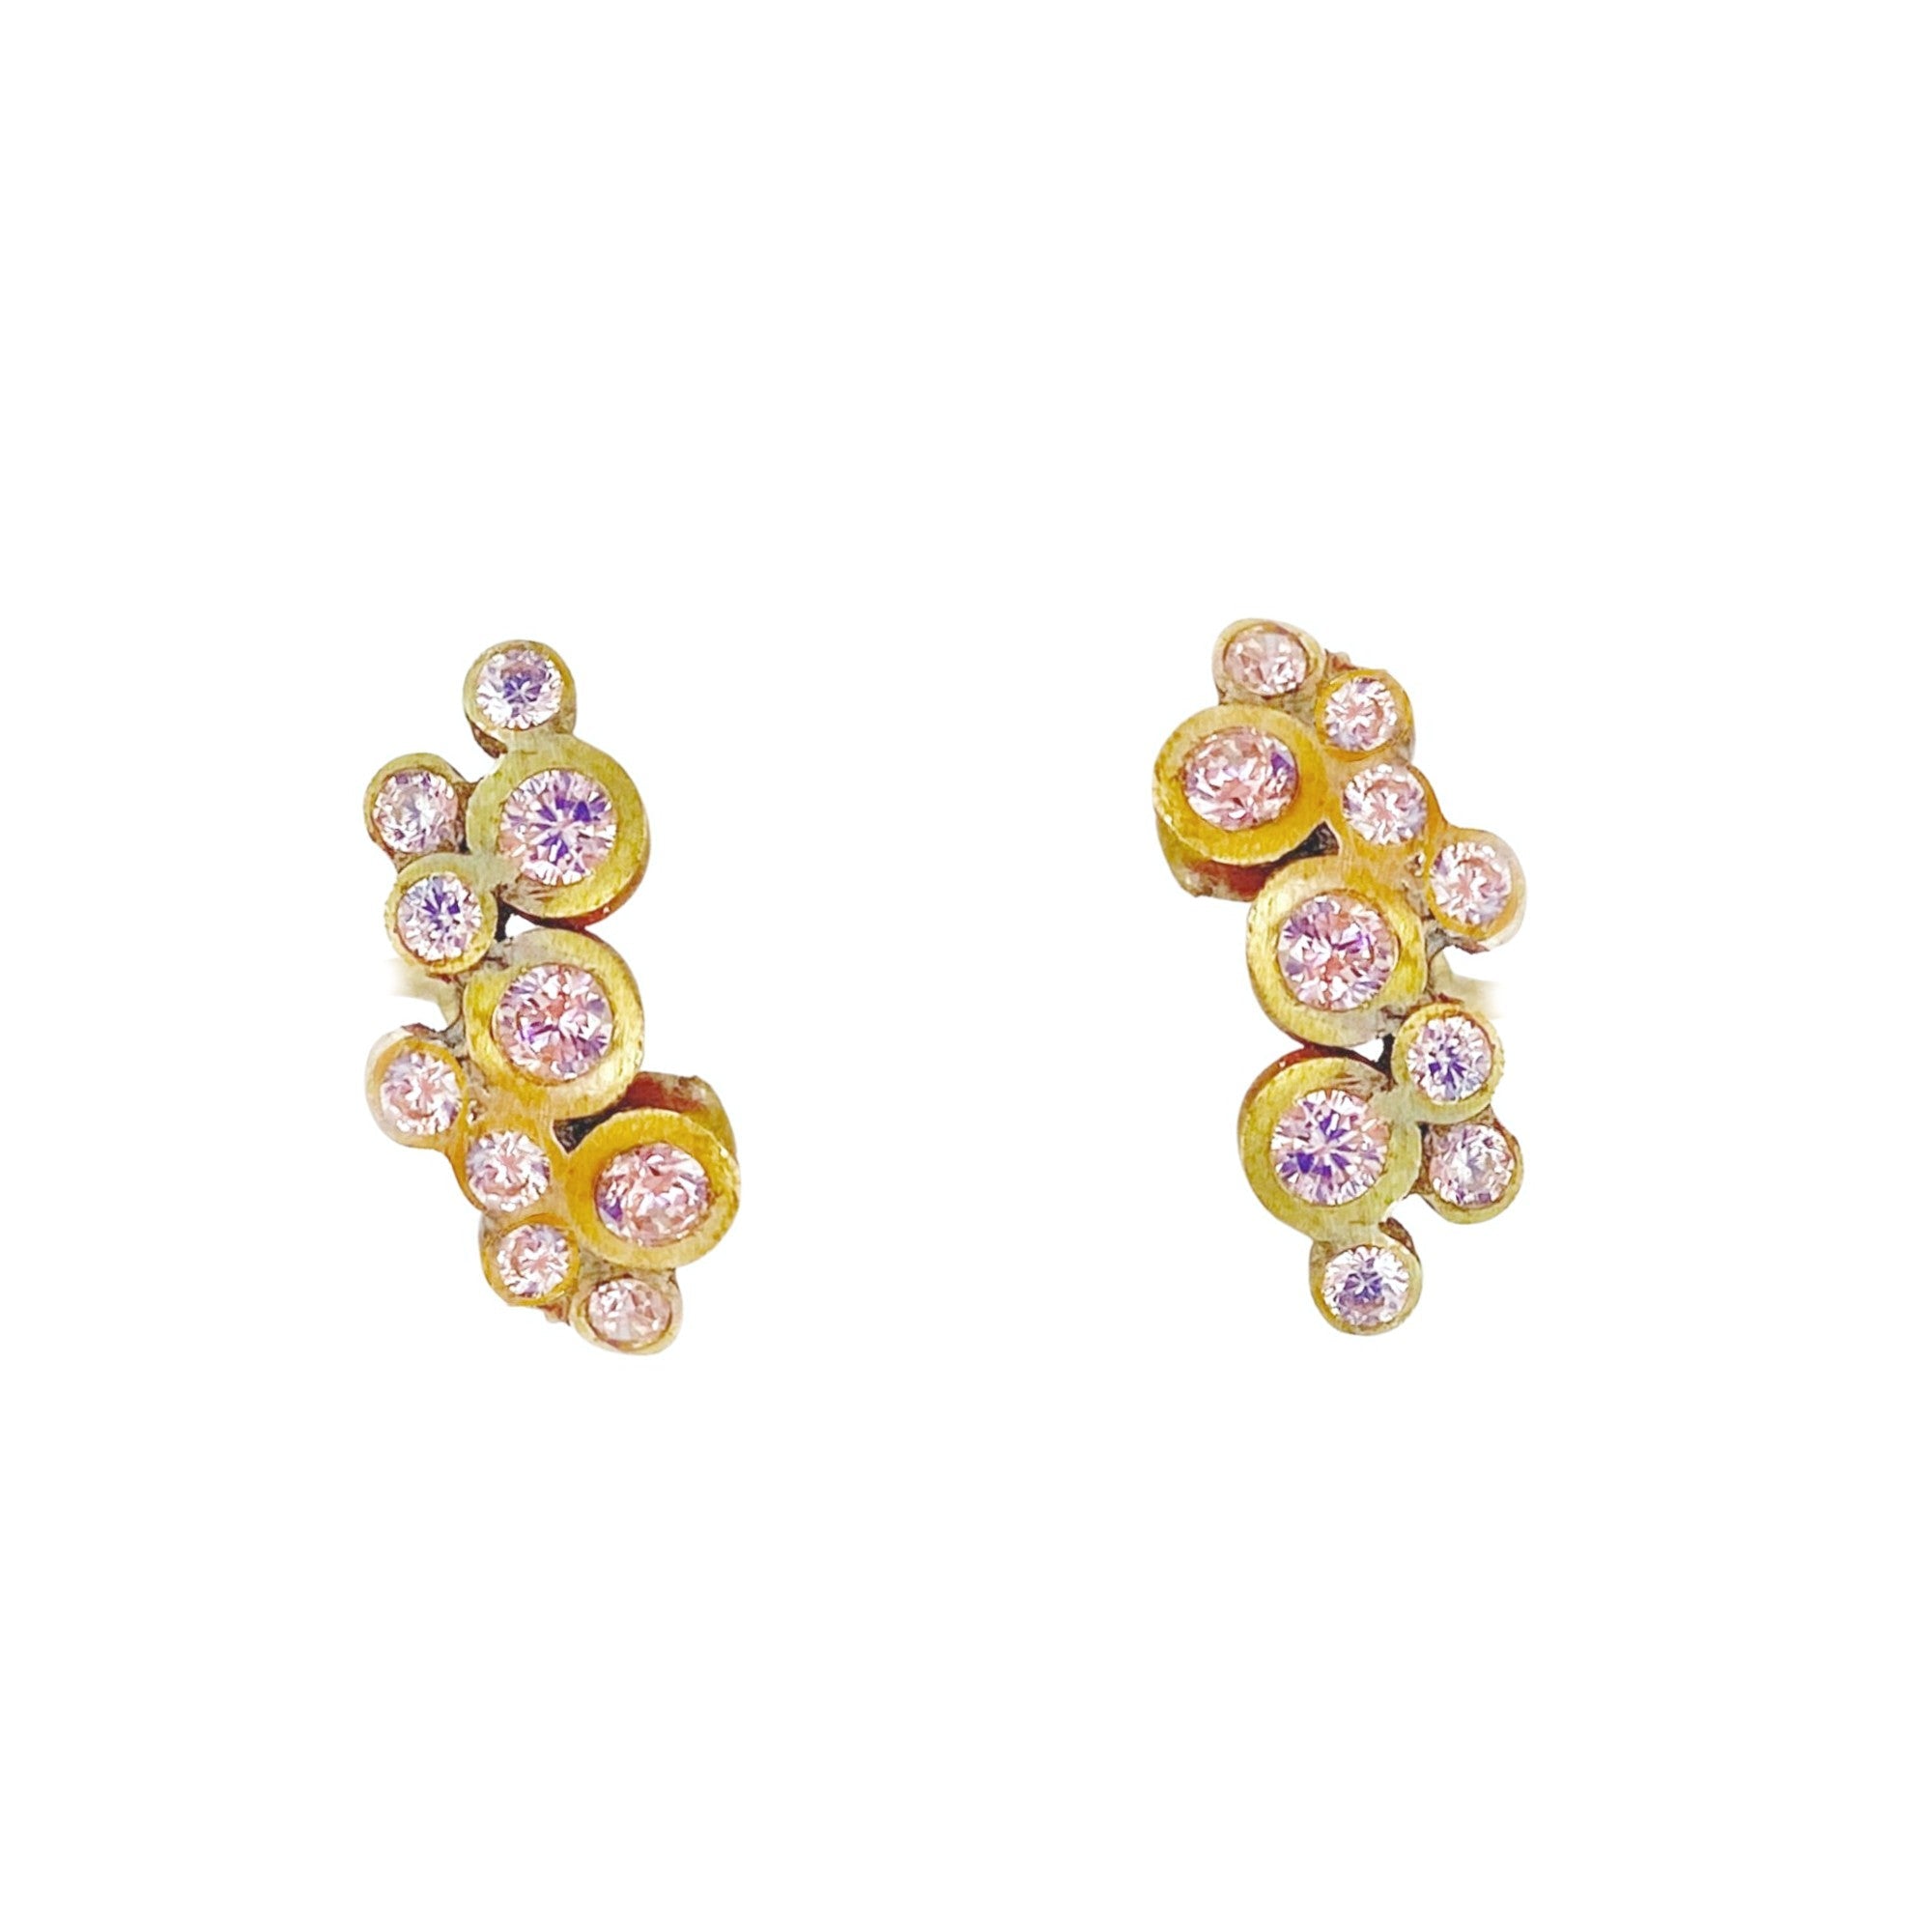 Blisstonique Pink and White Sapphire Stud Earrings